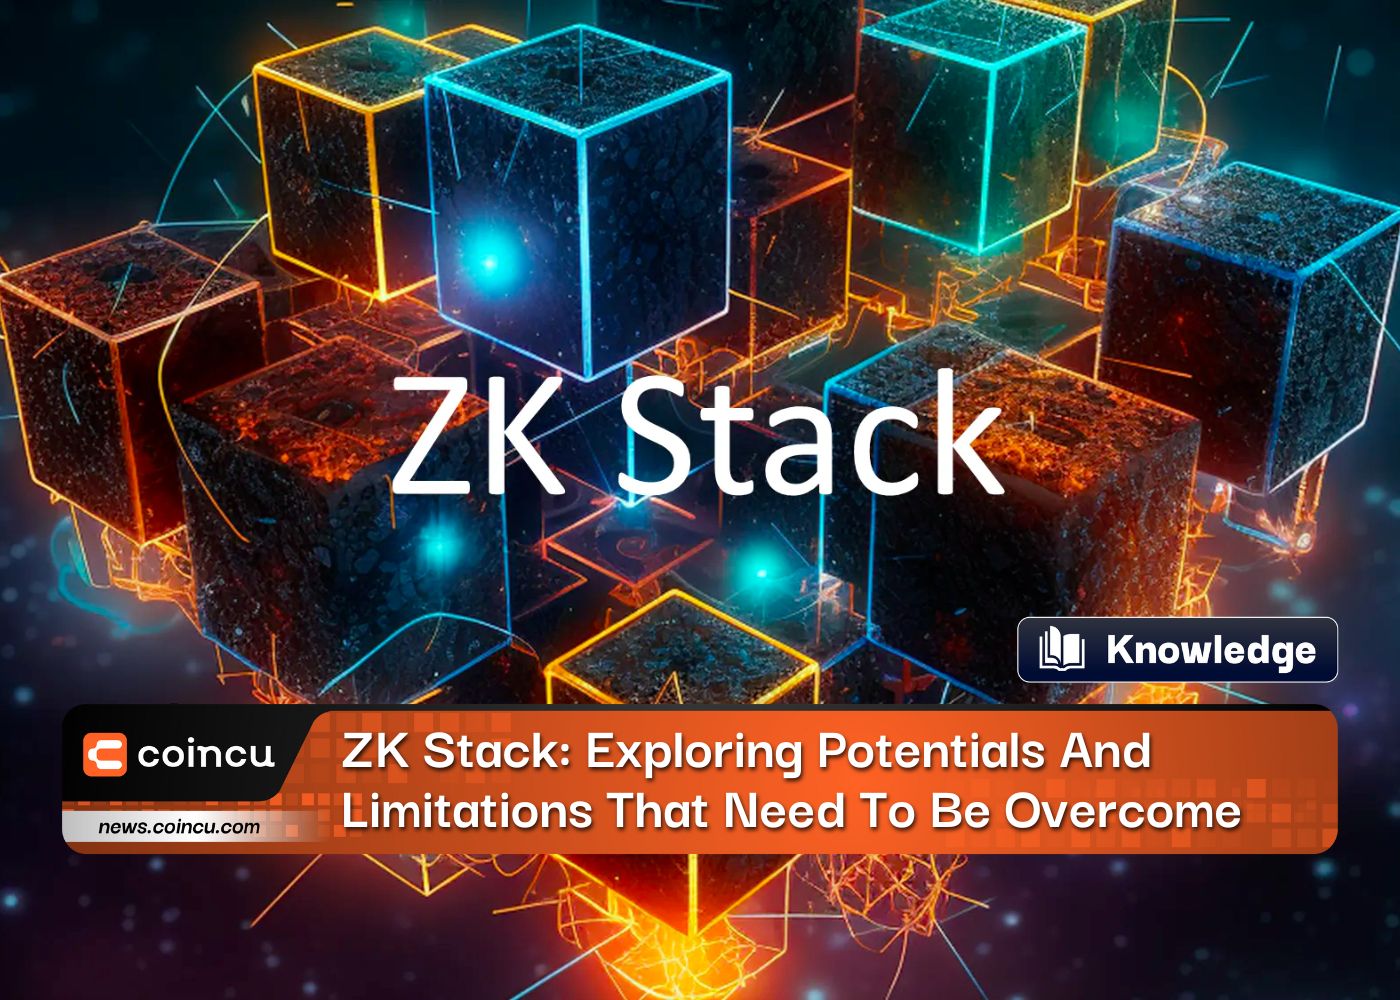 ZK Stack: Exploring Potentials And Limitations That Need To Be Overcome